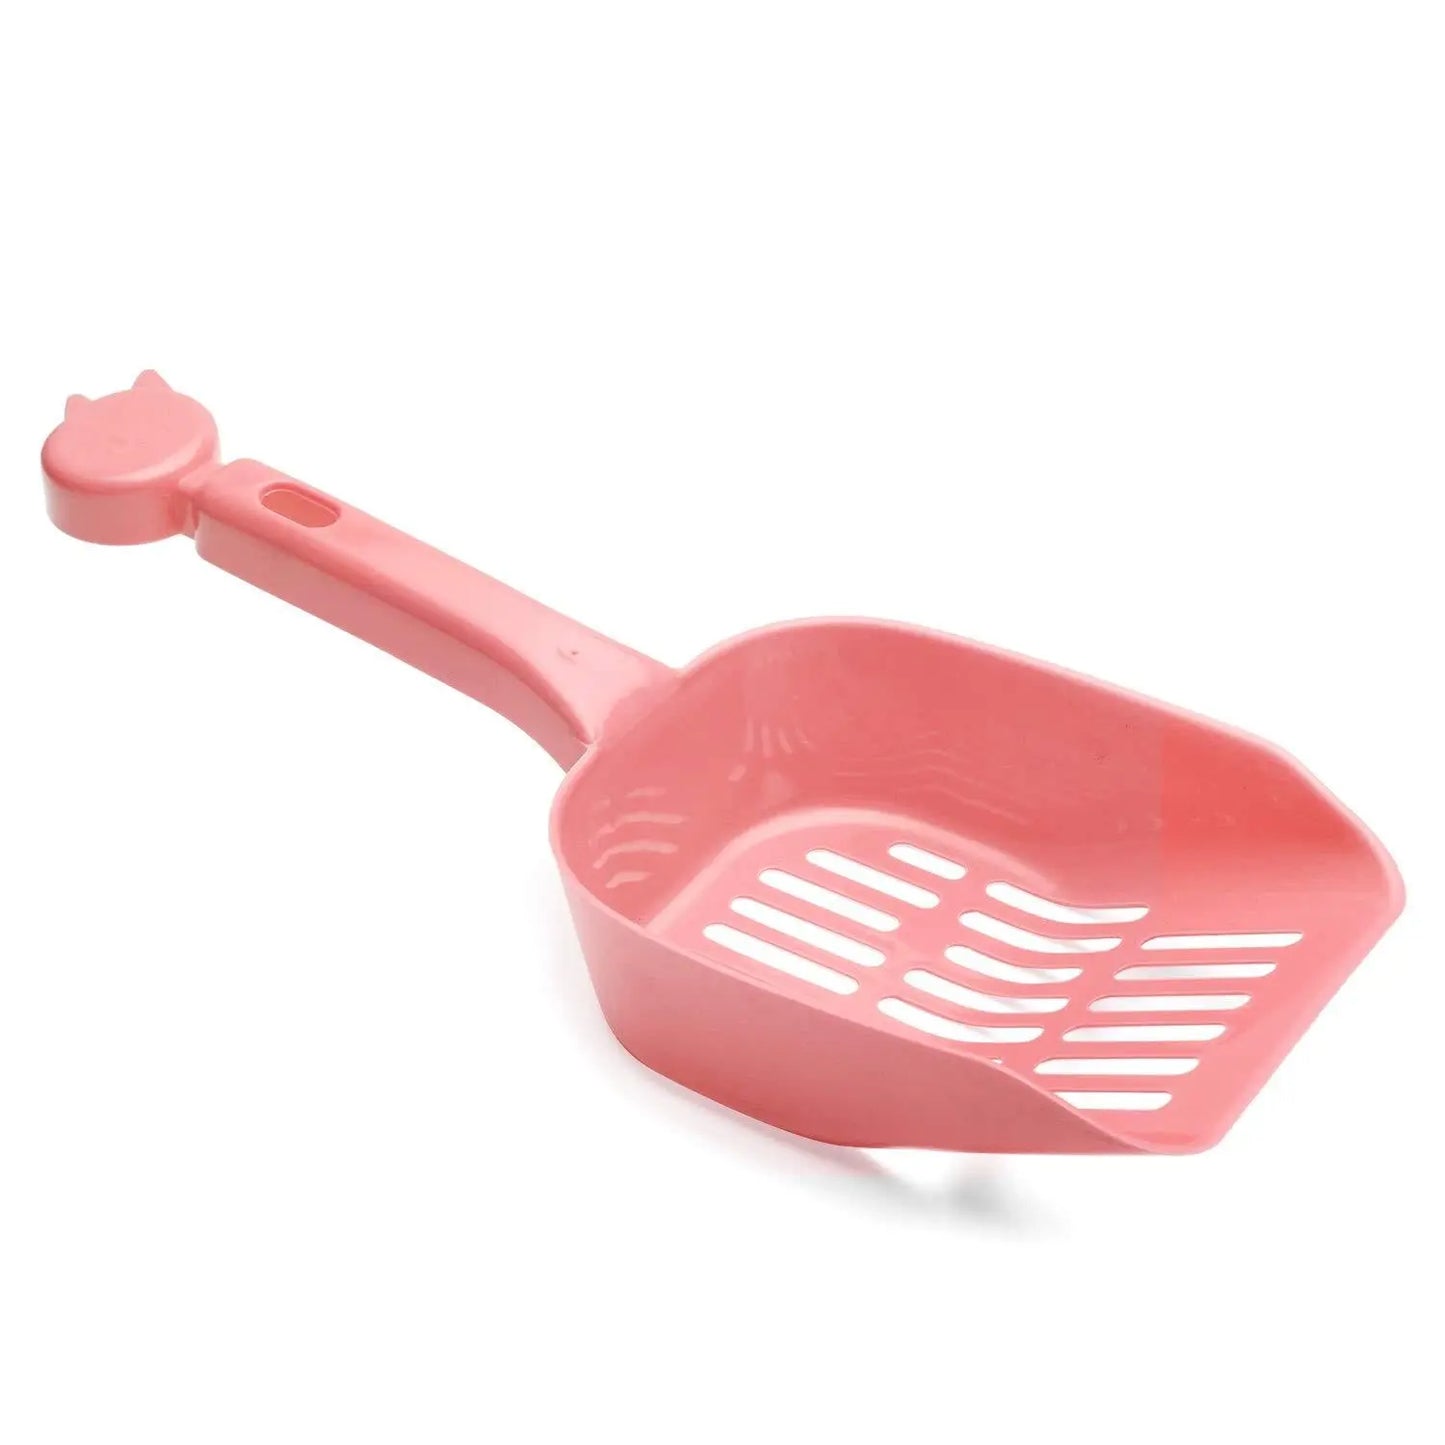 Jacky Treats Cat Litter Scooper with Deep Shovel - Designed by Cat Owners - Sifter with Holder - Solid Handle (Peach, Only Scooper) Amanpetshop